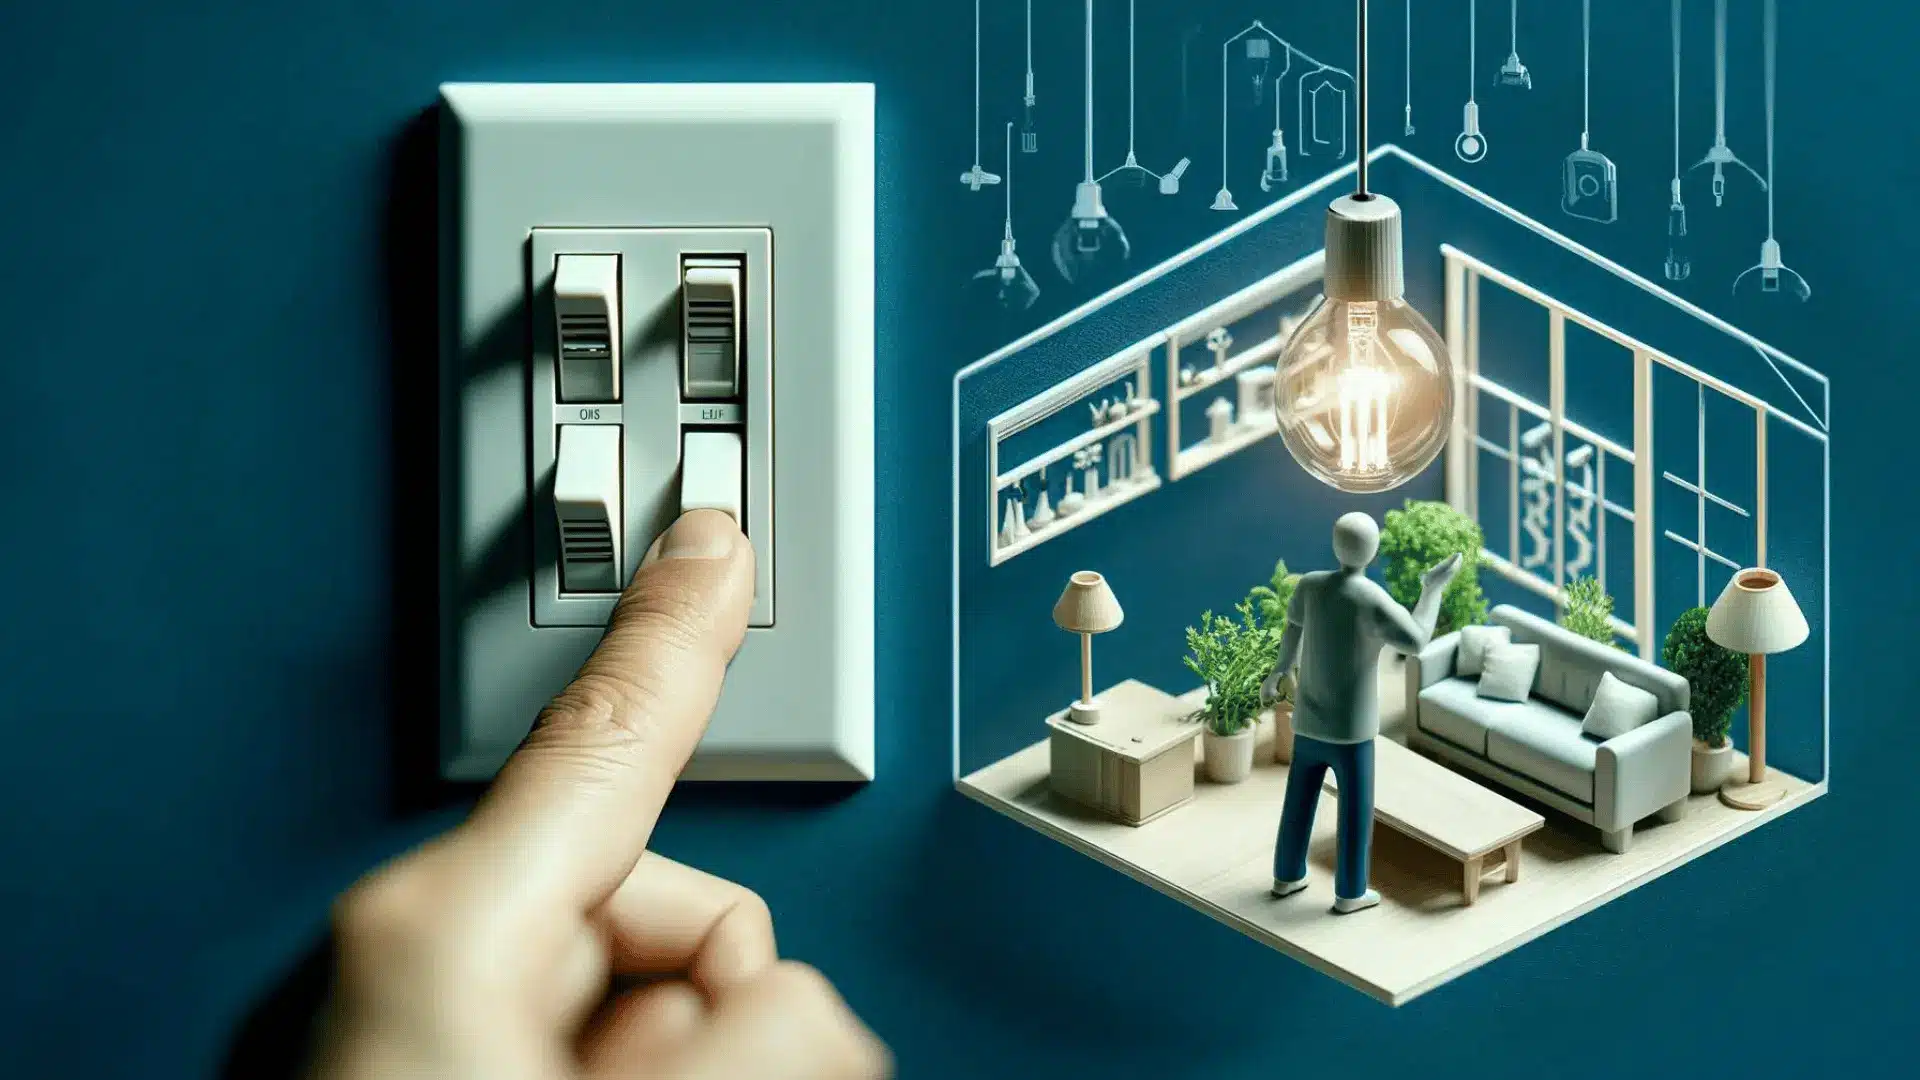 Conserving electricity by turning off lights when not in use, promoting energy-efficient habits.